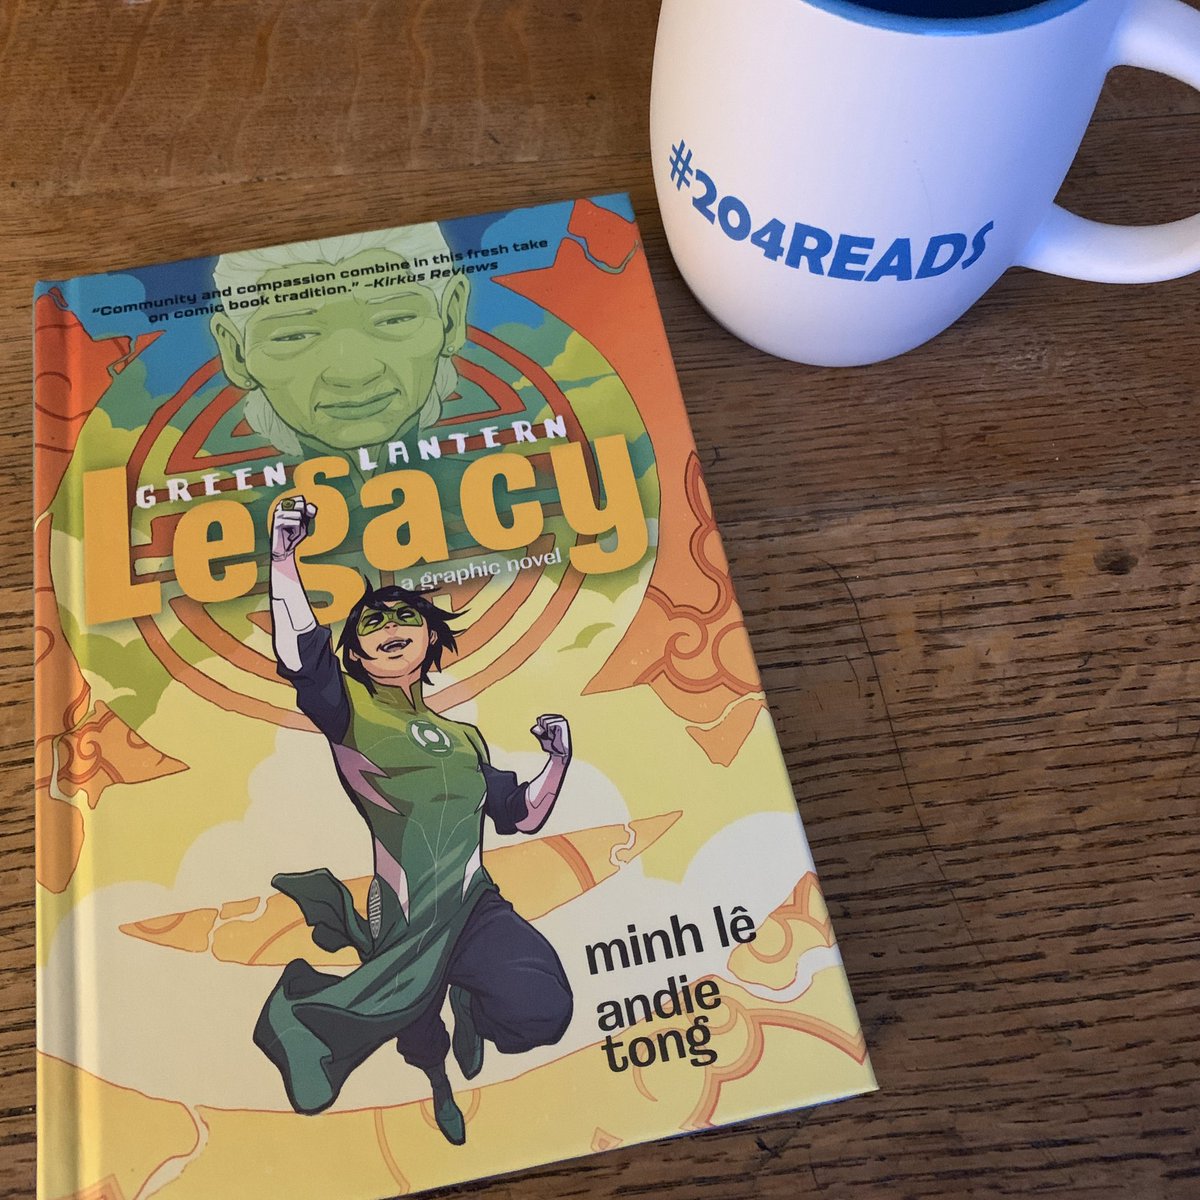 💚 Green Lantern Legacy by @bottomshelfbks blew me away! An incredible graphic novel about tradition, peace, and community. The last page brought me to (happy) tears! 💚 #204Reads #bookaday #graphicnovelsforkids #middlegrademarch